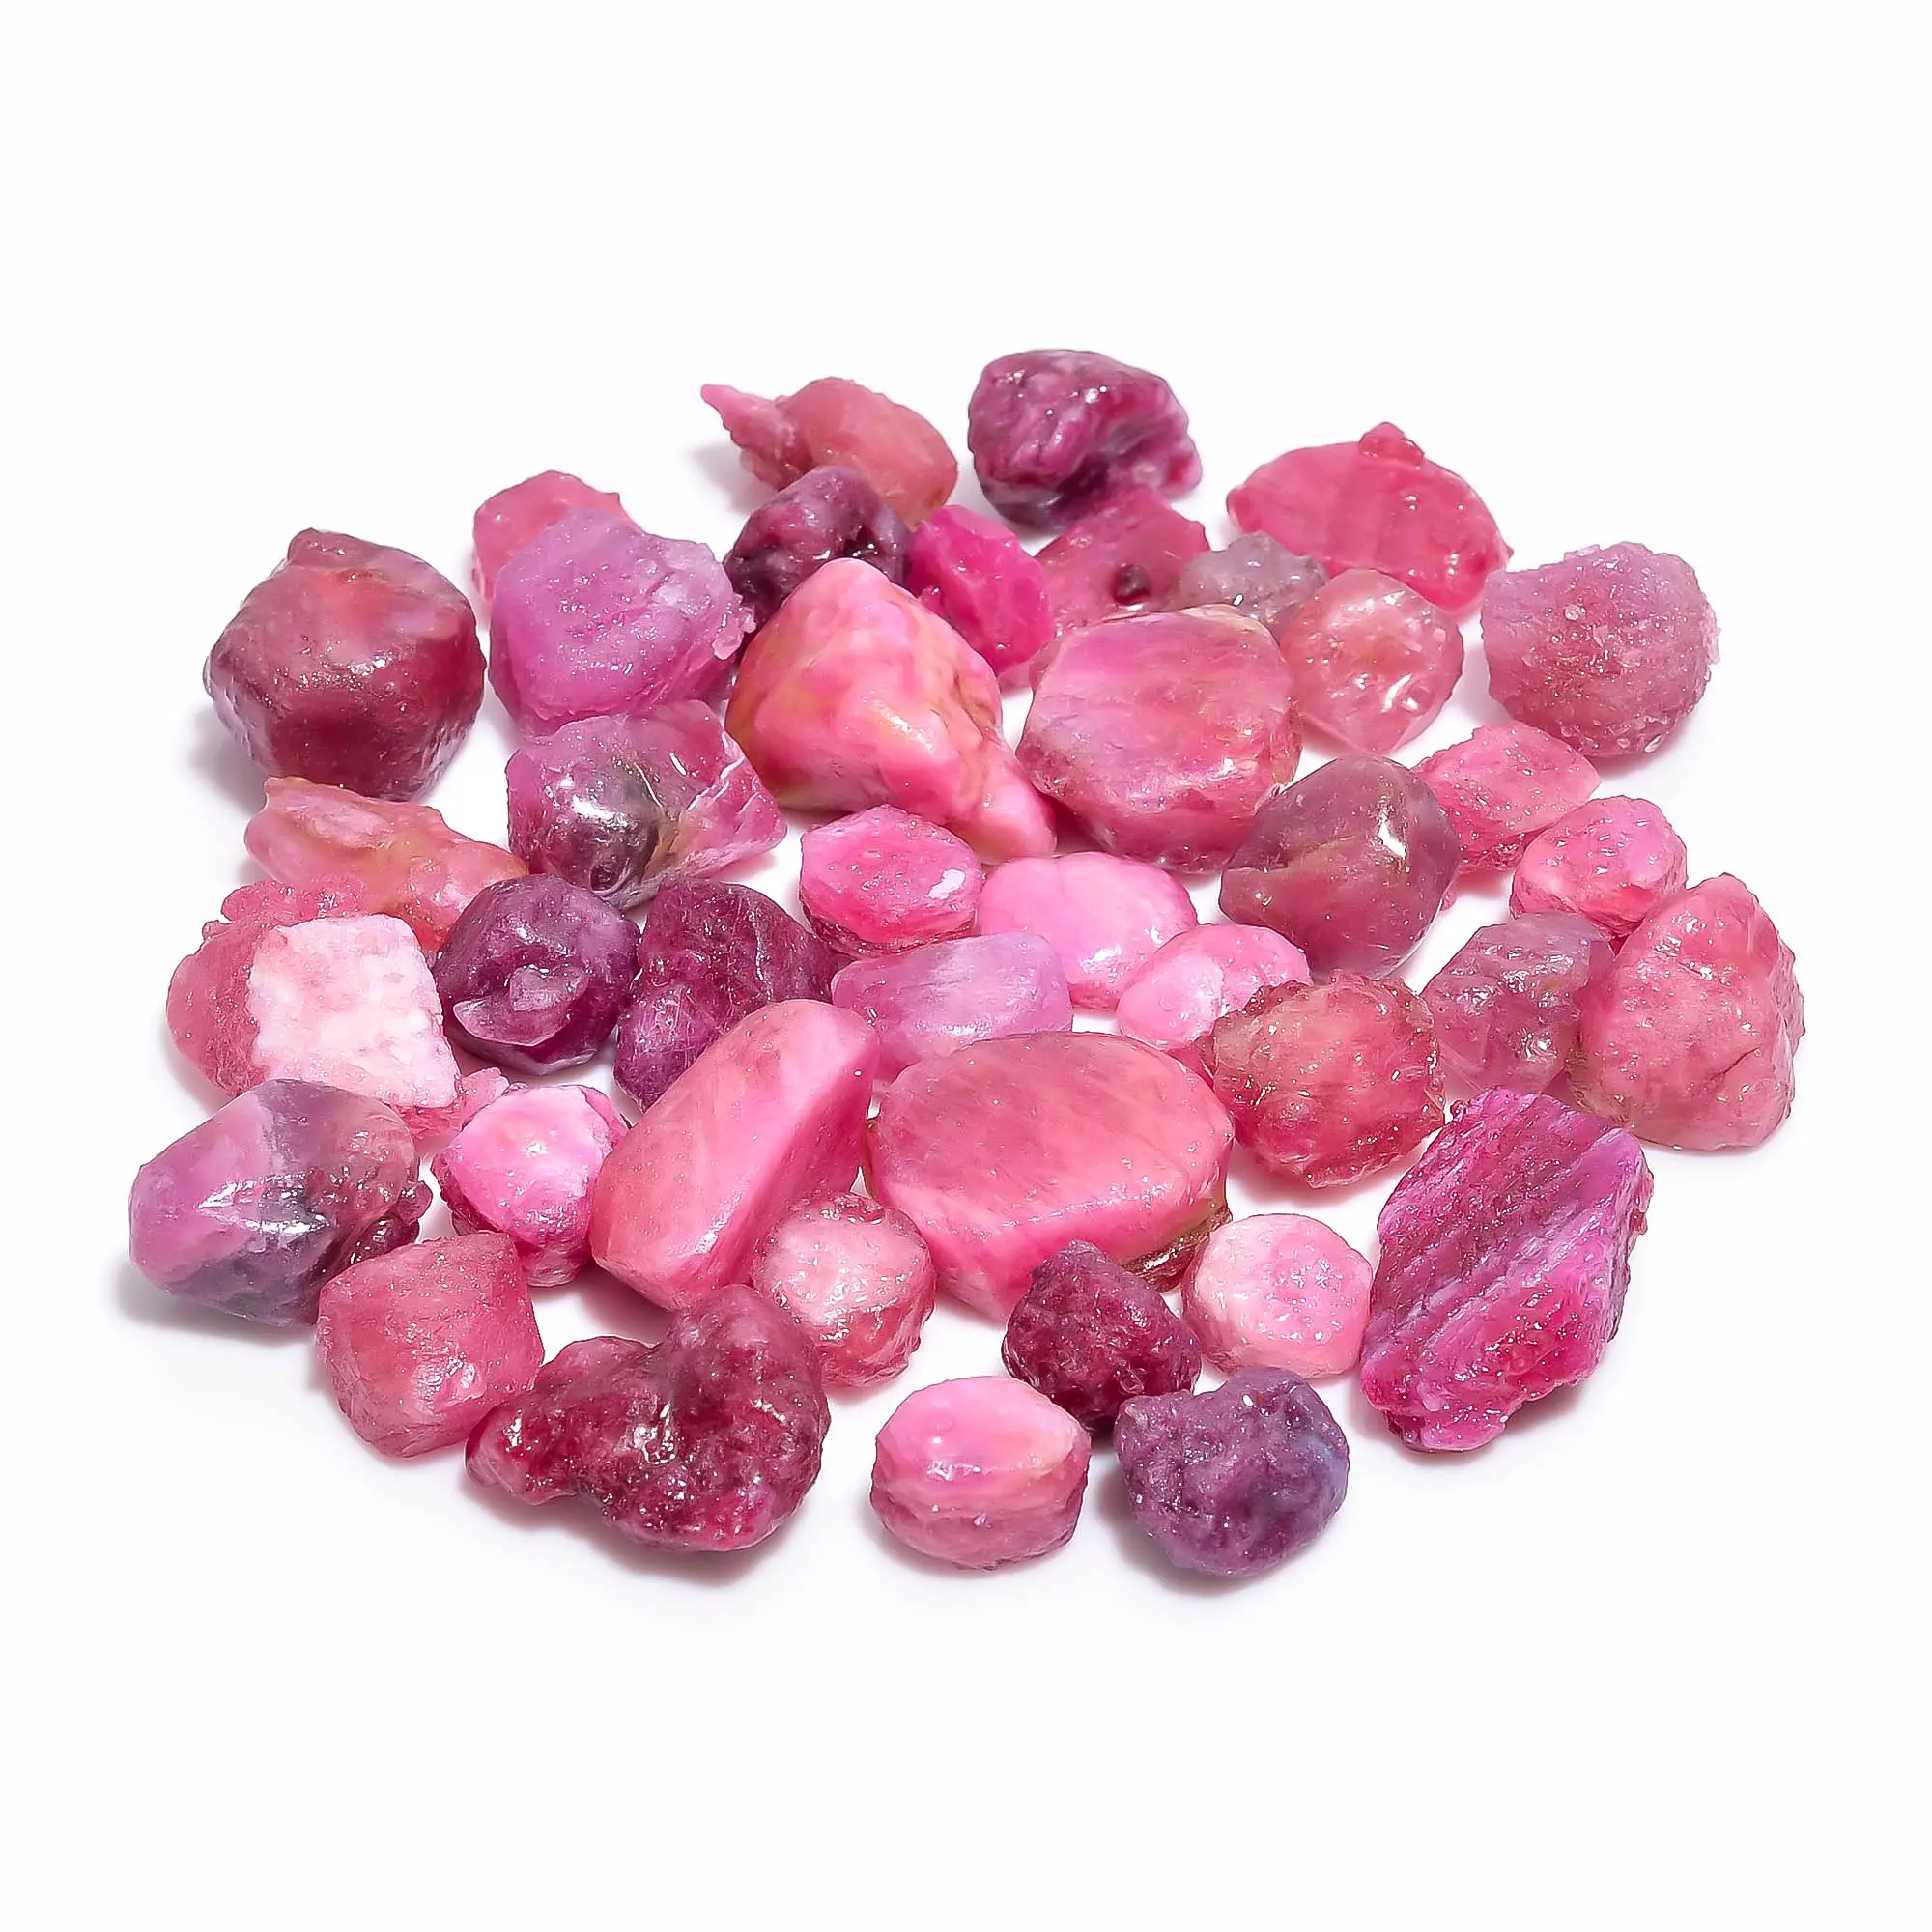 Natural Ruby Raw Gemstone Wholesale Rough Crystals rough red fluorite Specimen Crystal Rough Stone For Bulk Orders